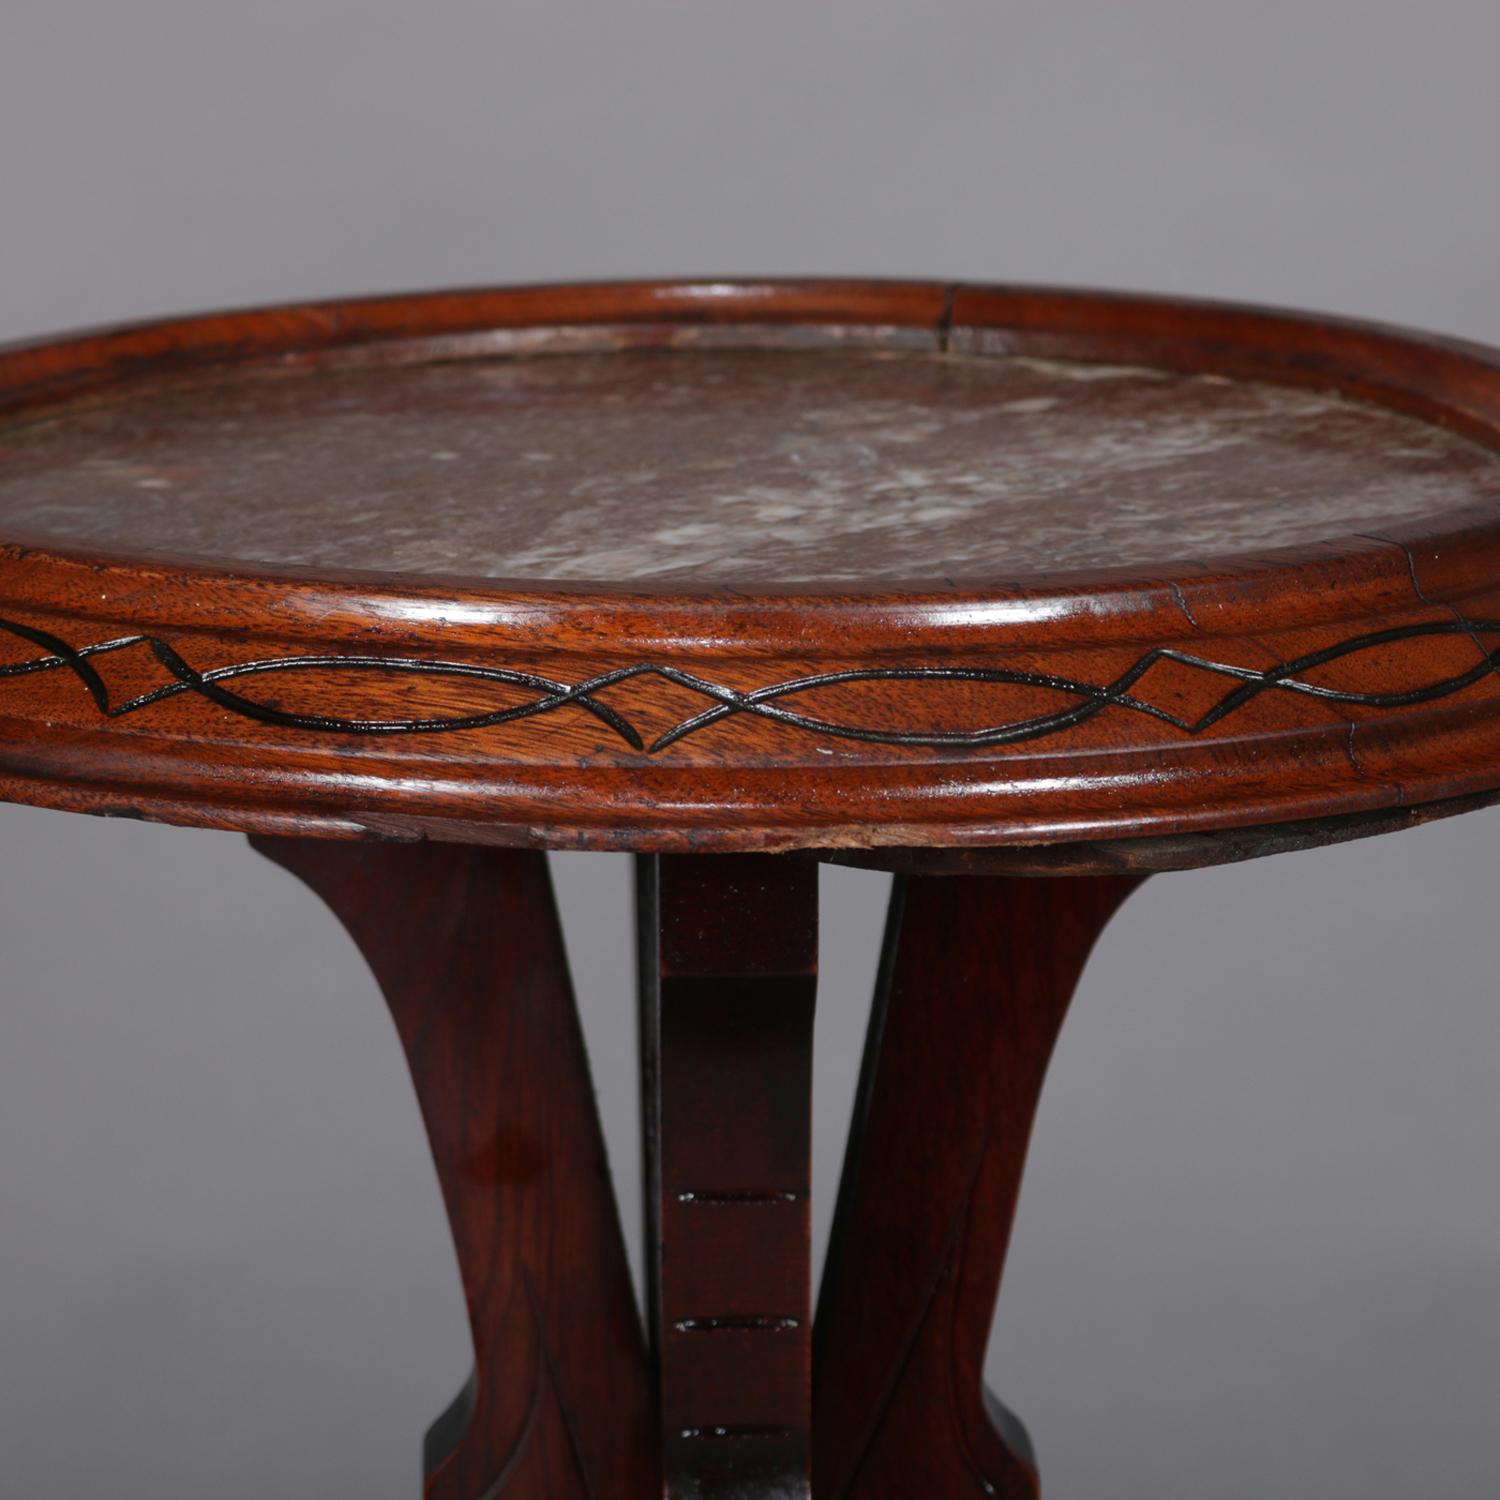 Antique Aesthetic Movement Carved Walnut Marble-Top Plant Stand, circa 1880 (amerikanisch)